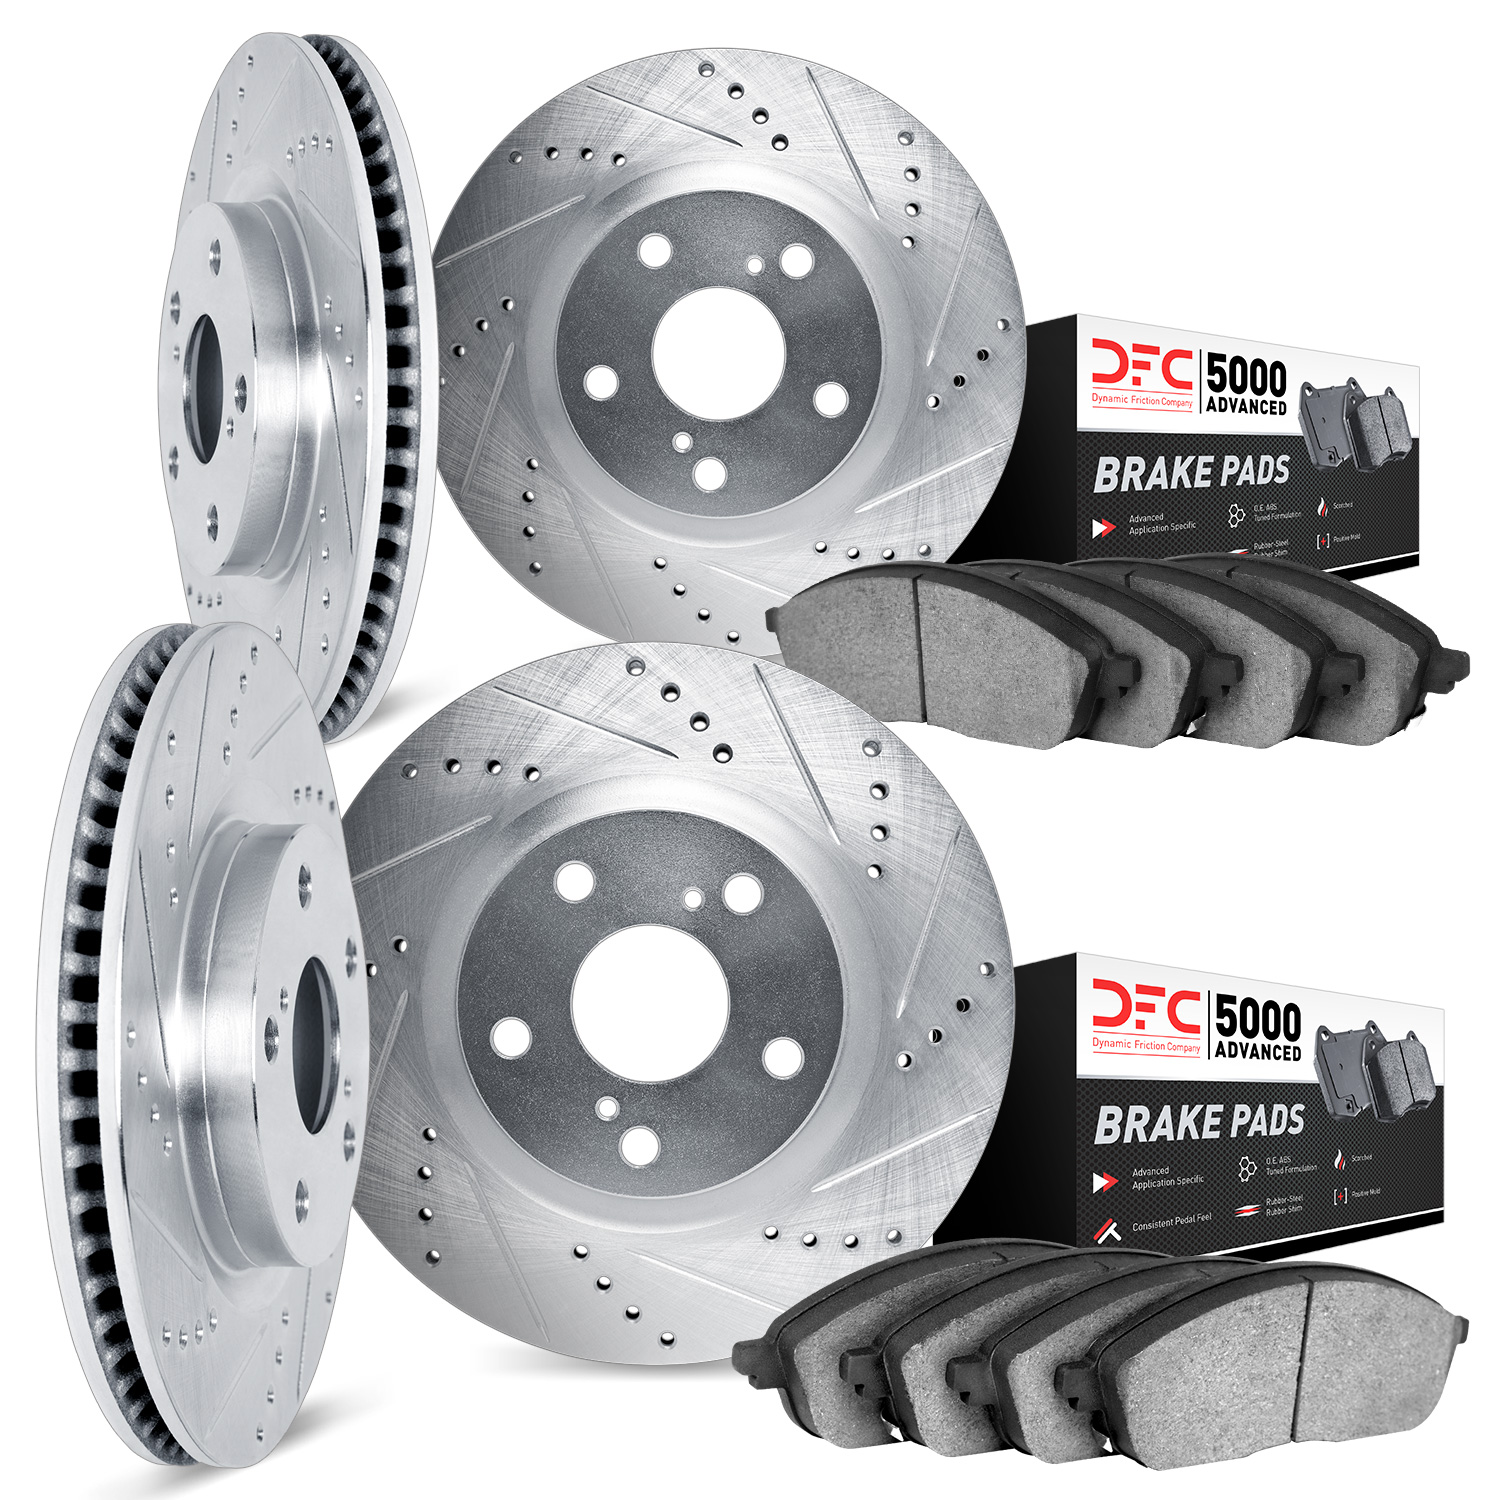 7504-31025 Drilled/Slotted Brake Rotors w/5000 Advanced Brake Pads Kit [Silver], 2006-2006 BMW, Position: Front and Rear